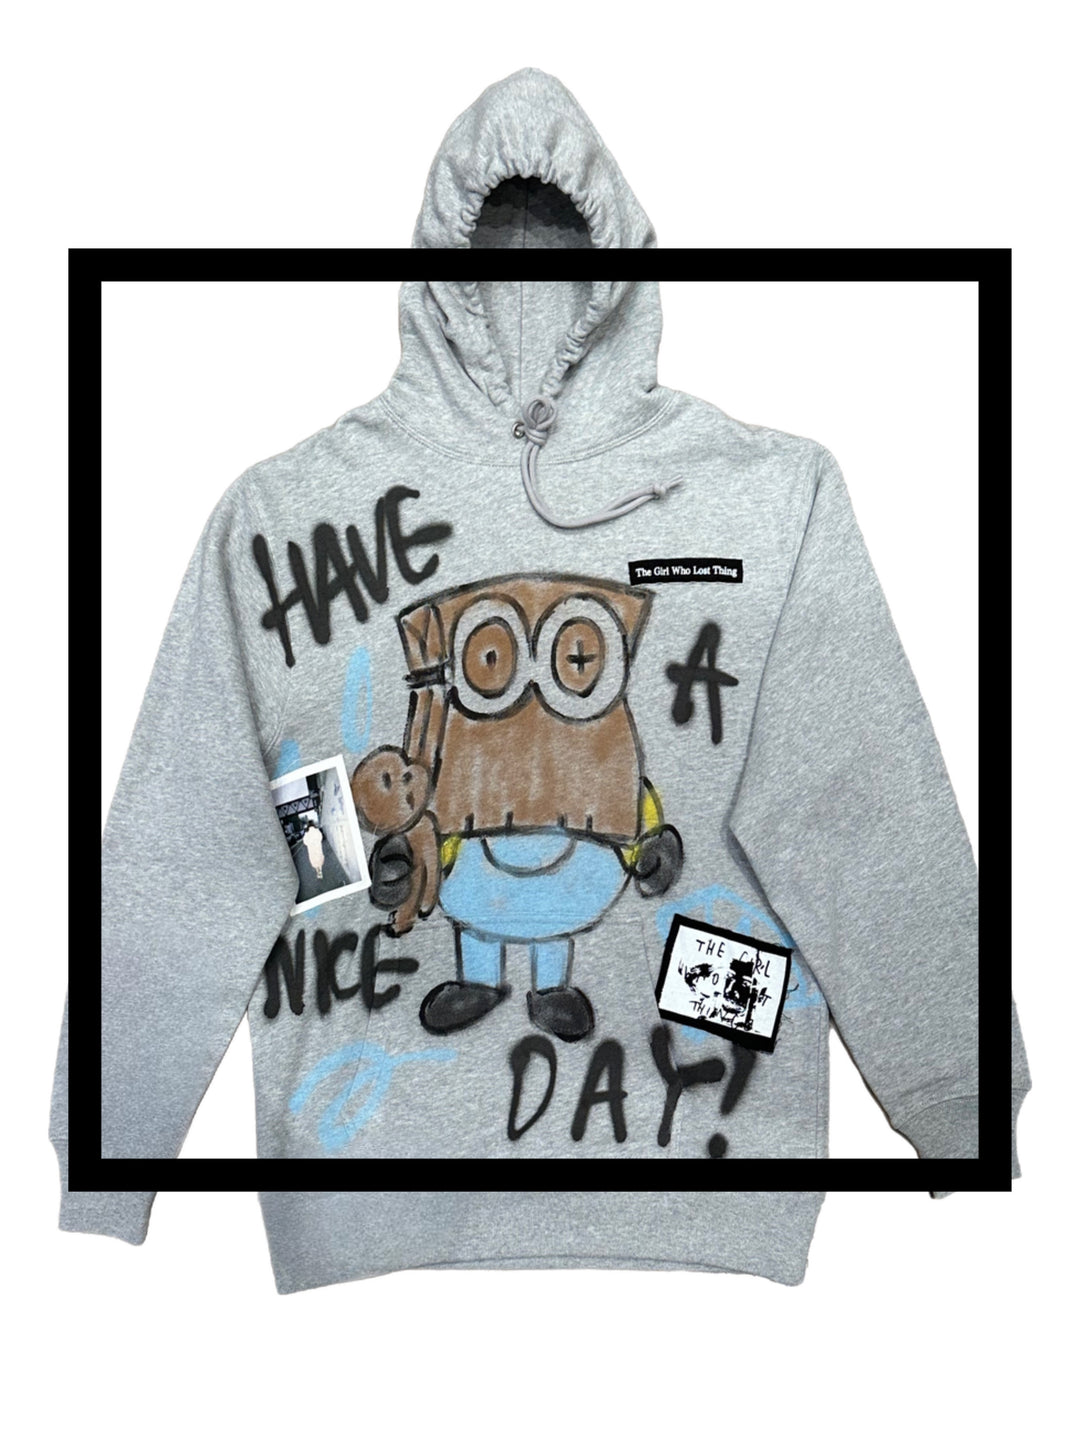 3NYCONCEPT.COM - HAVE A NICE DAY GUERNIKA HOODIE